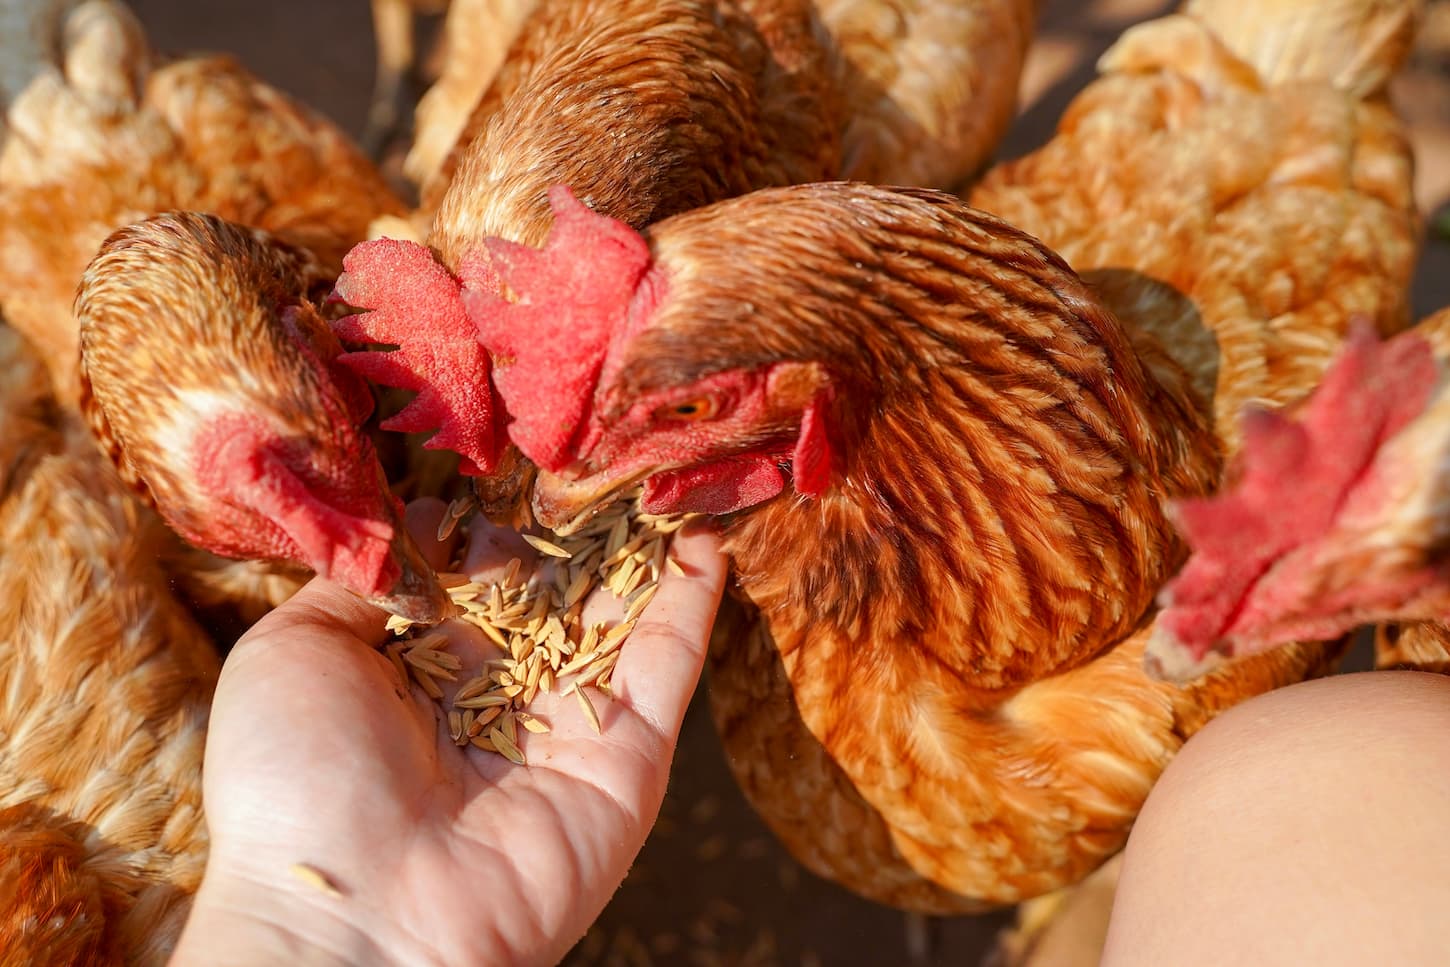 An image of chickens eating food from woman's hand.